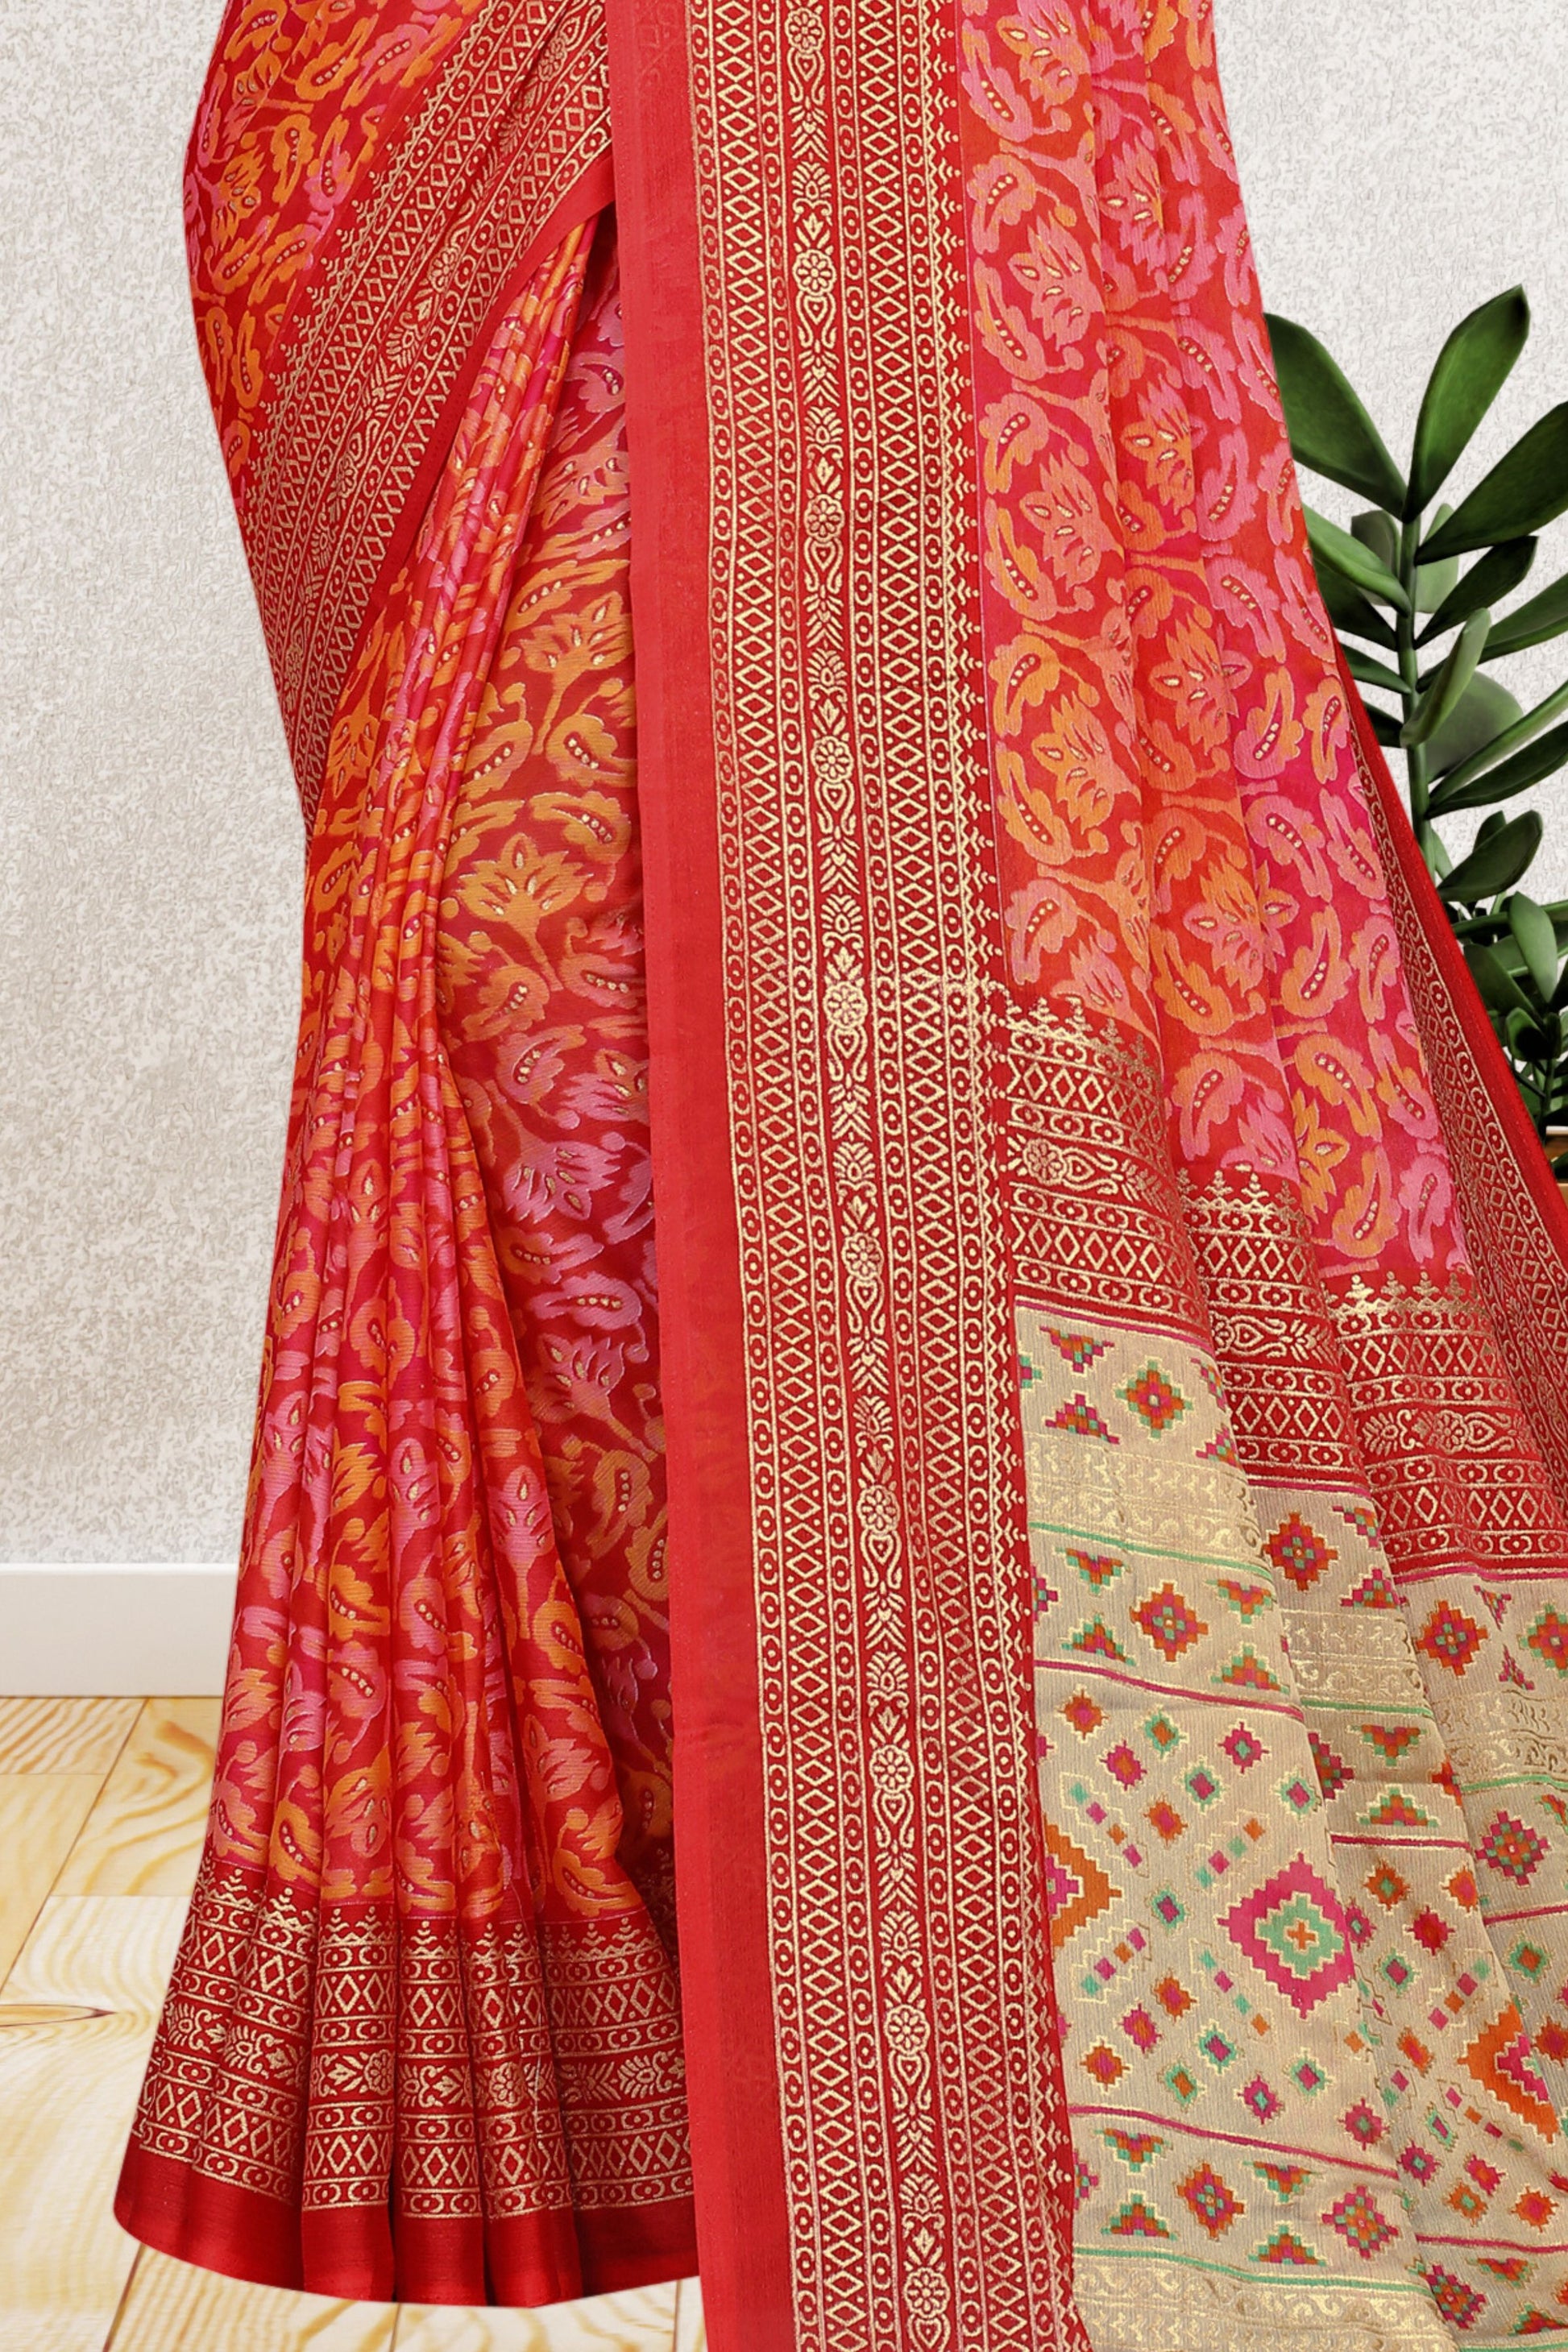 Hightex Party Wear Brasso Floral and Geometric printed Saree